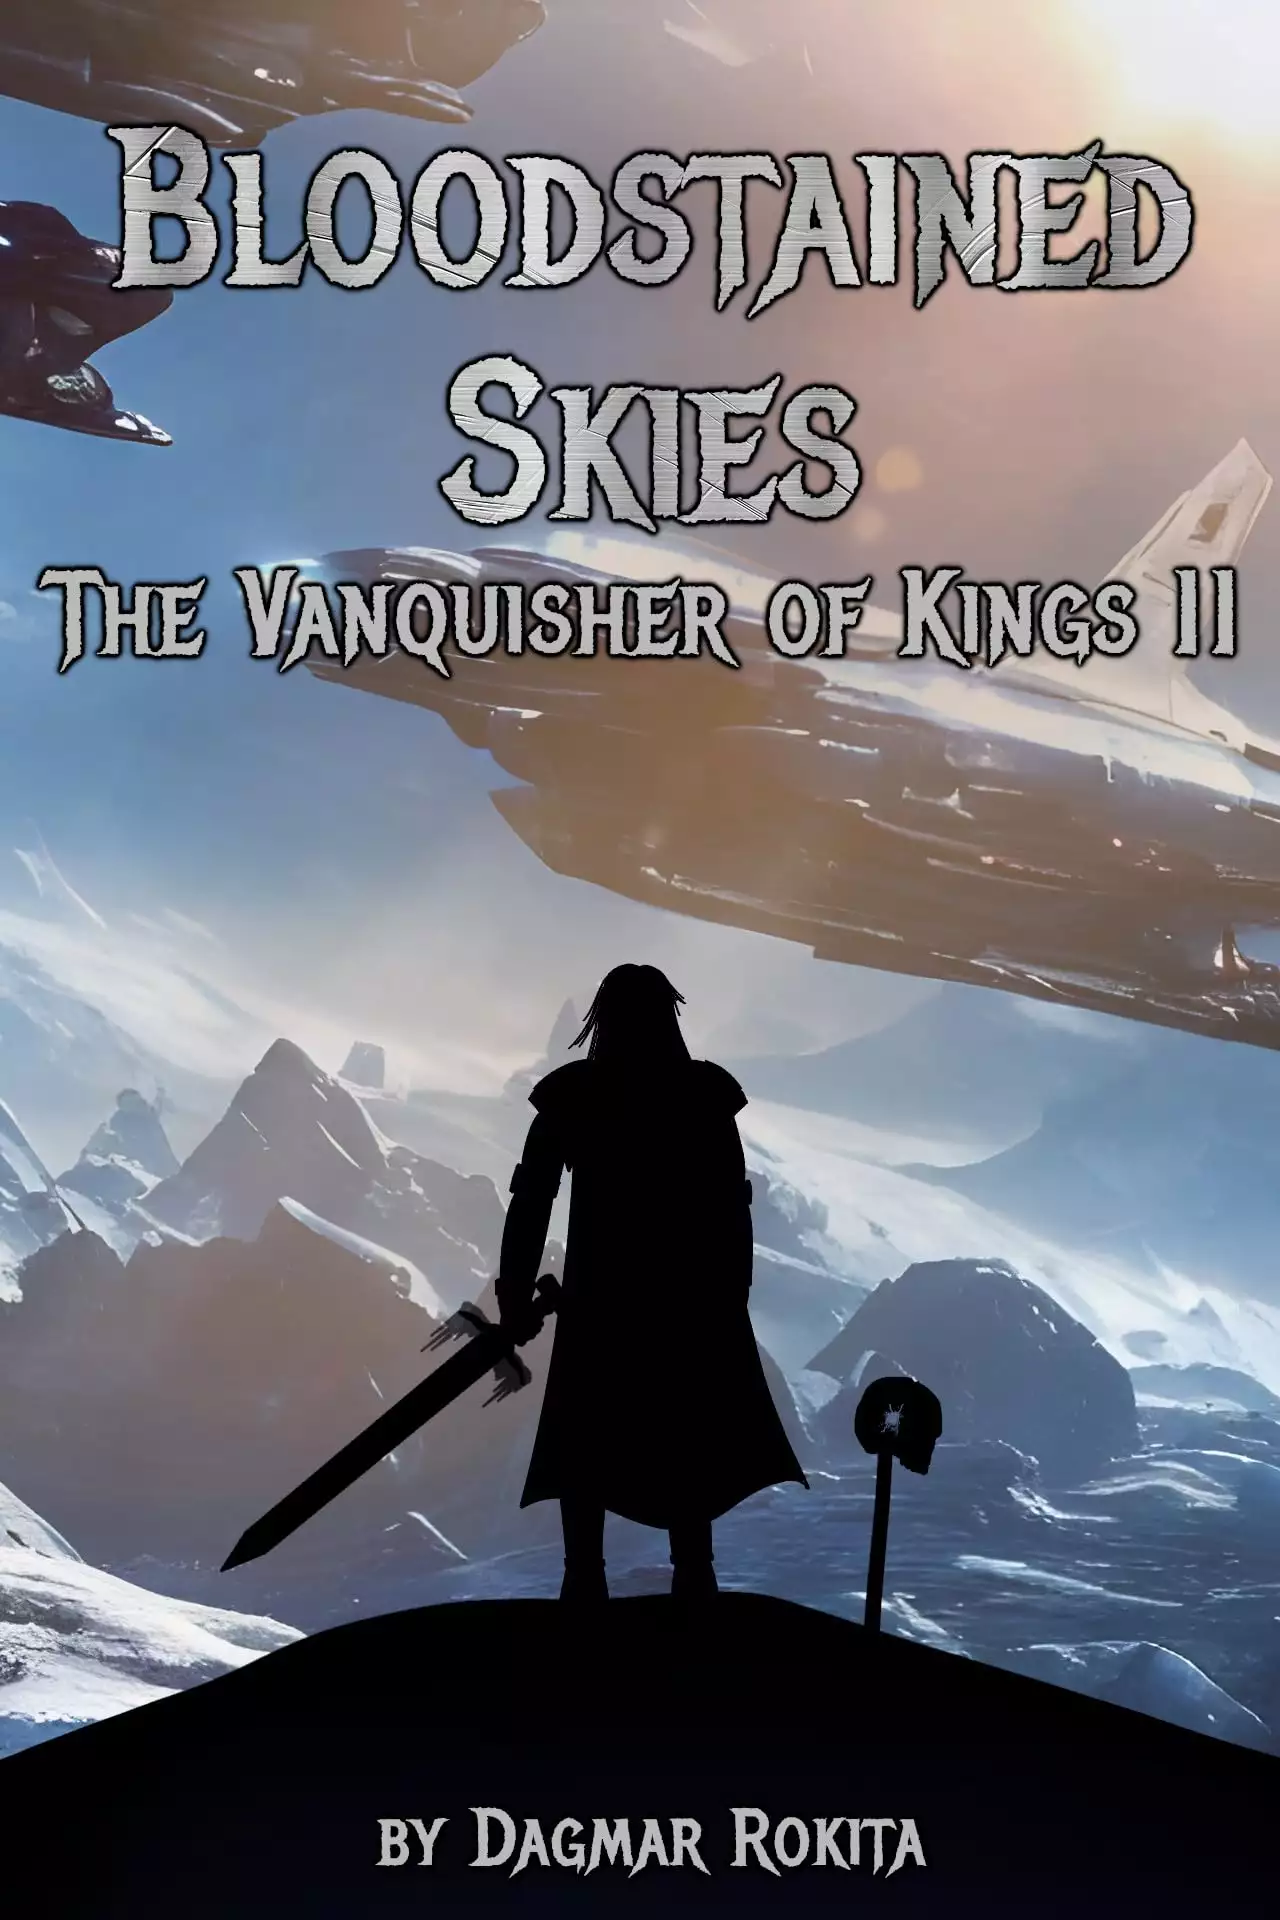 Bloodstained Skies: The Vanquisher of Kings II